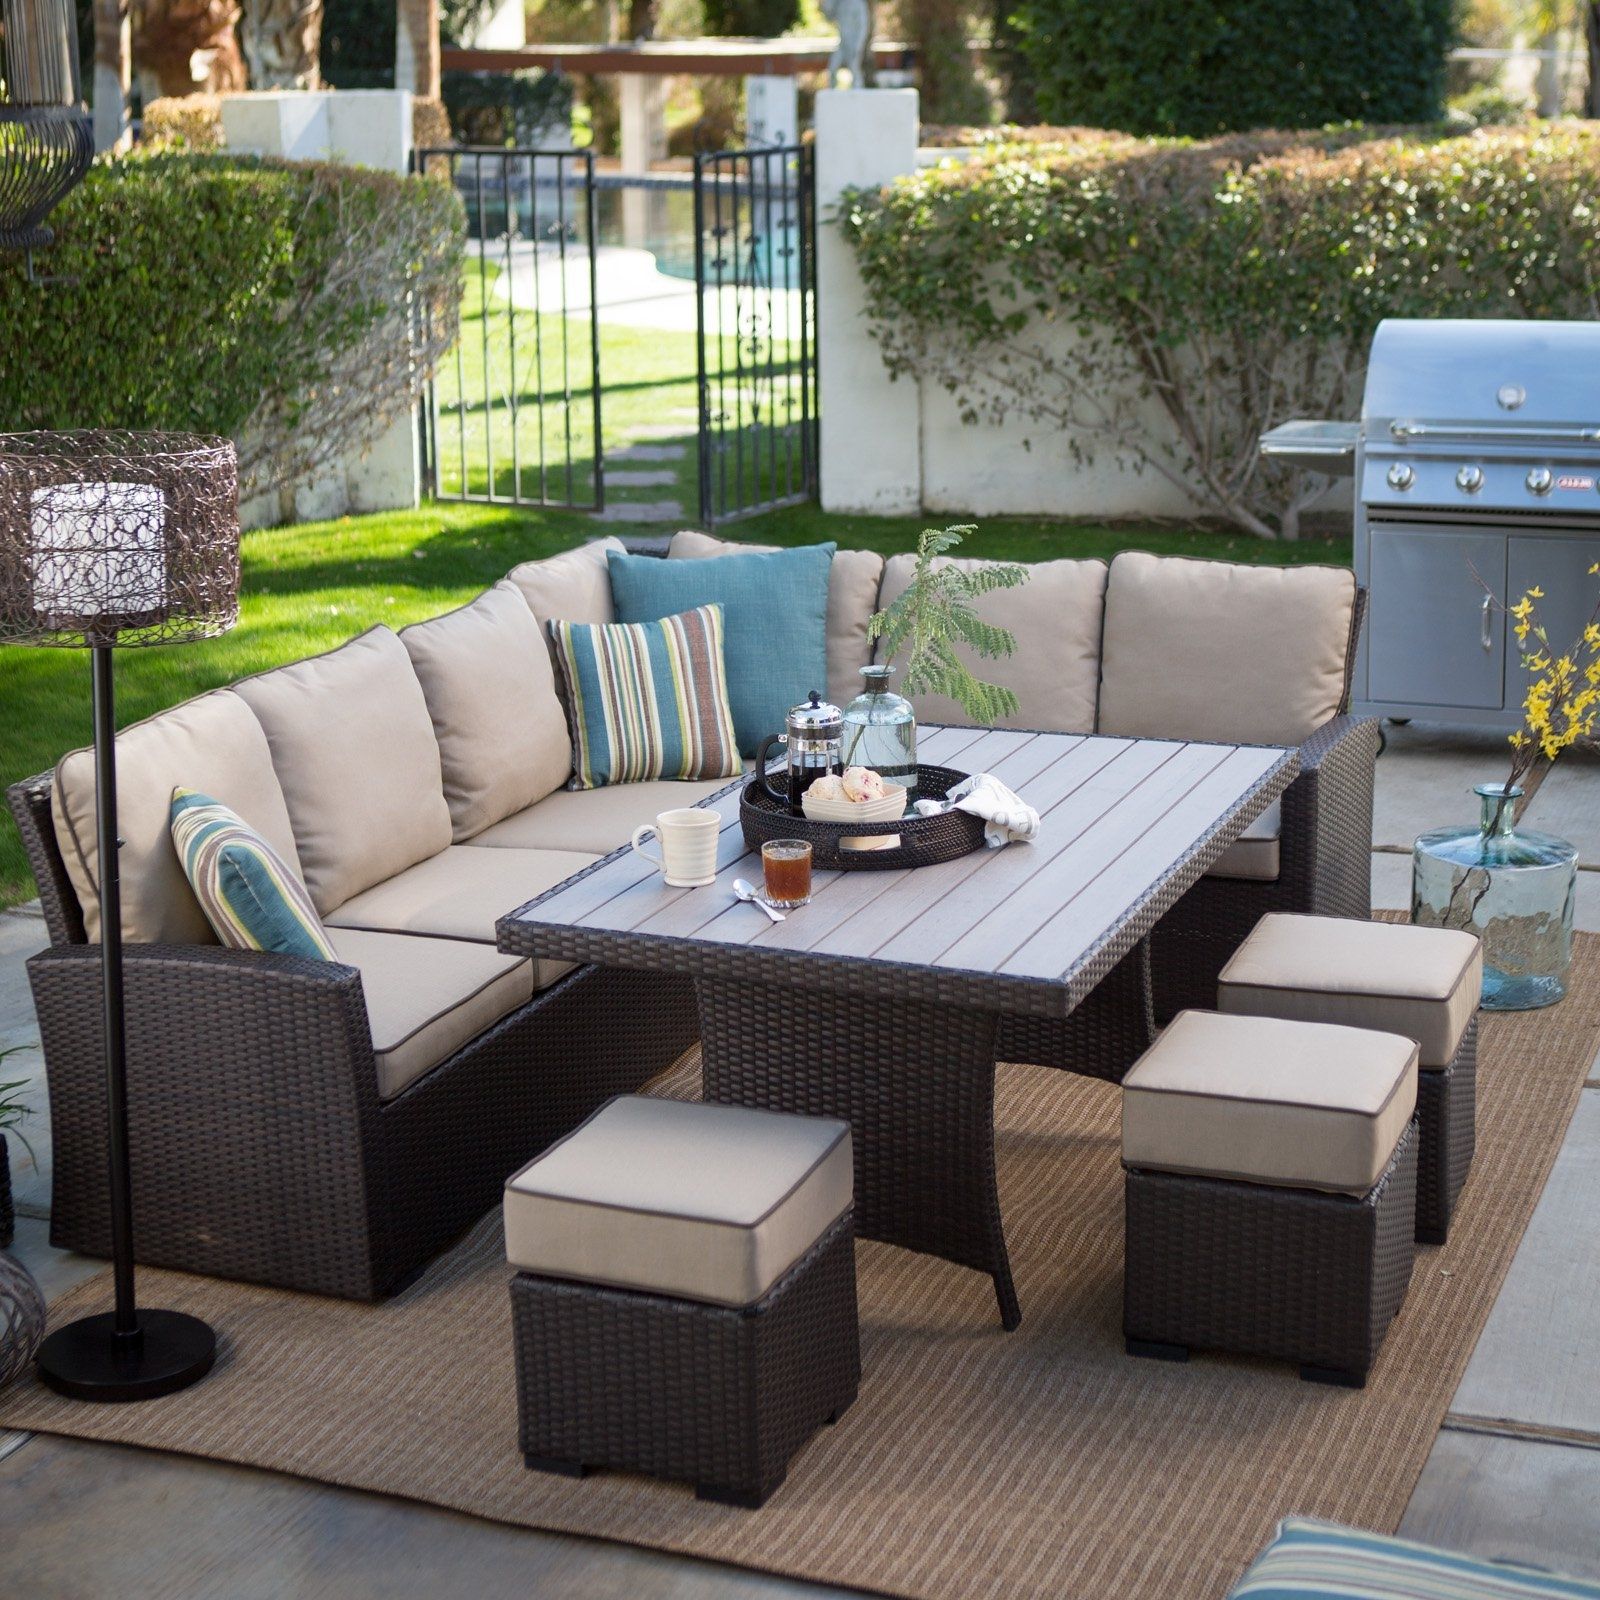 Patio Conversation Dining Sets Pertaining To Most Recent Belham Living Monticello All Weather Wicker Sofa Sectional Patio (View 1 of 20)